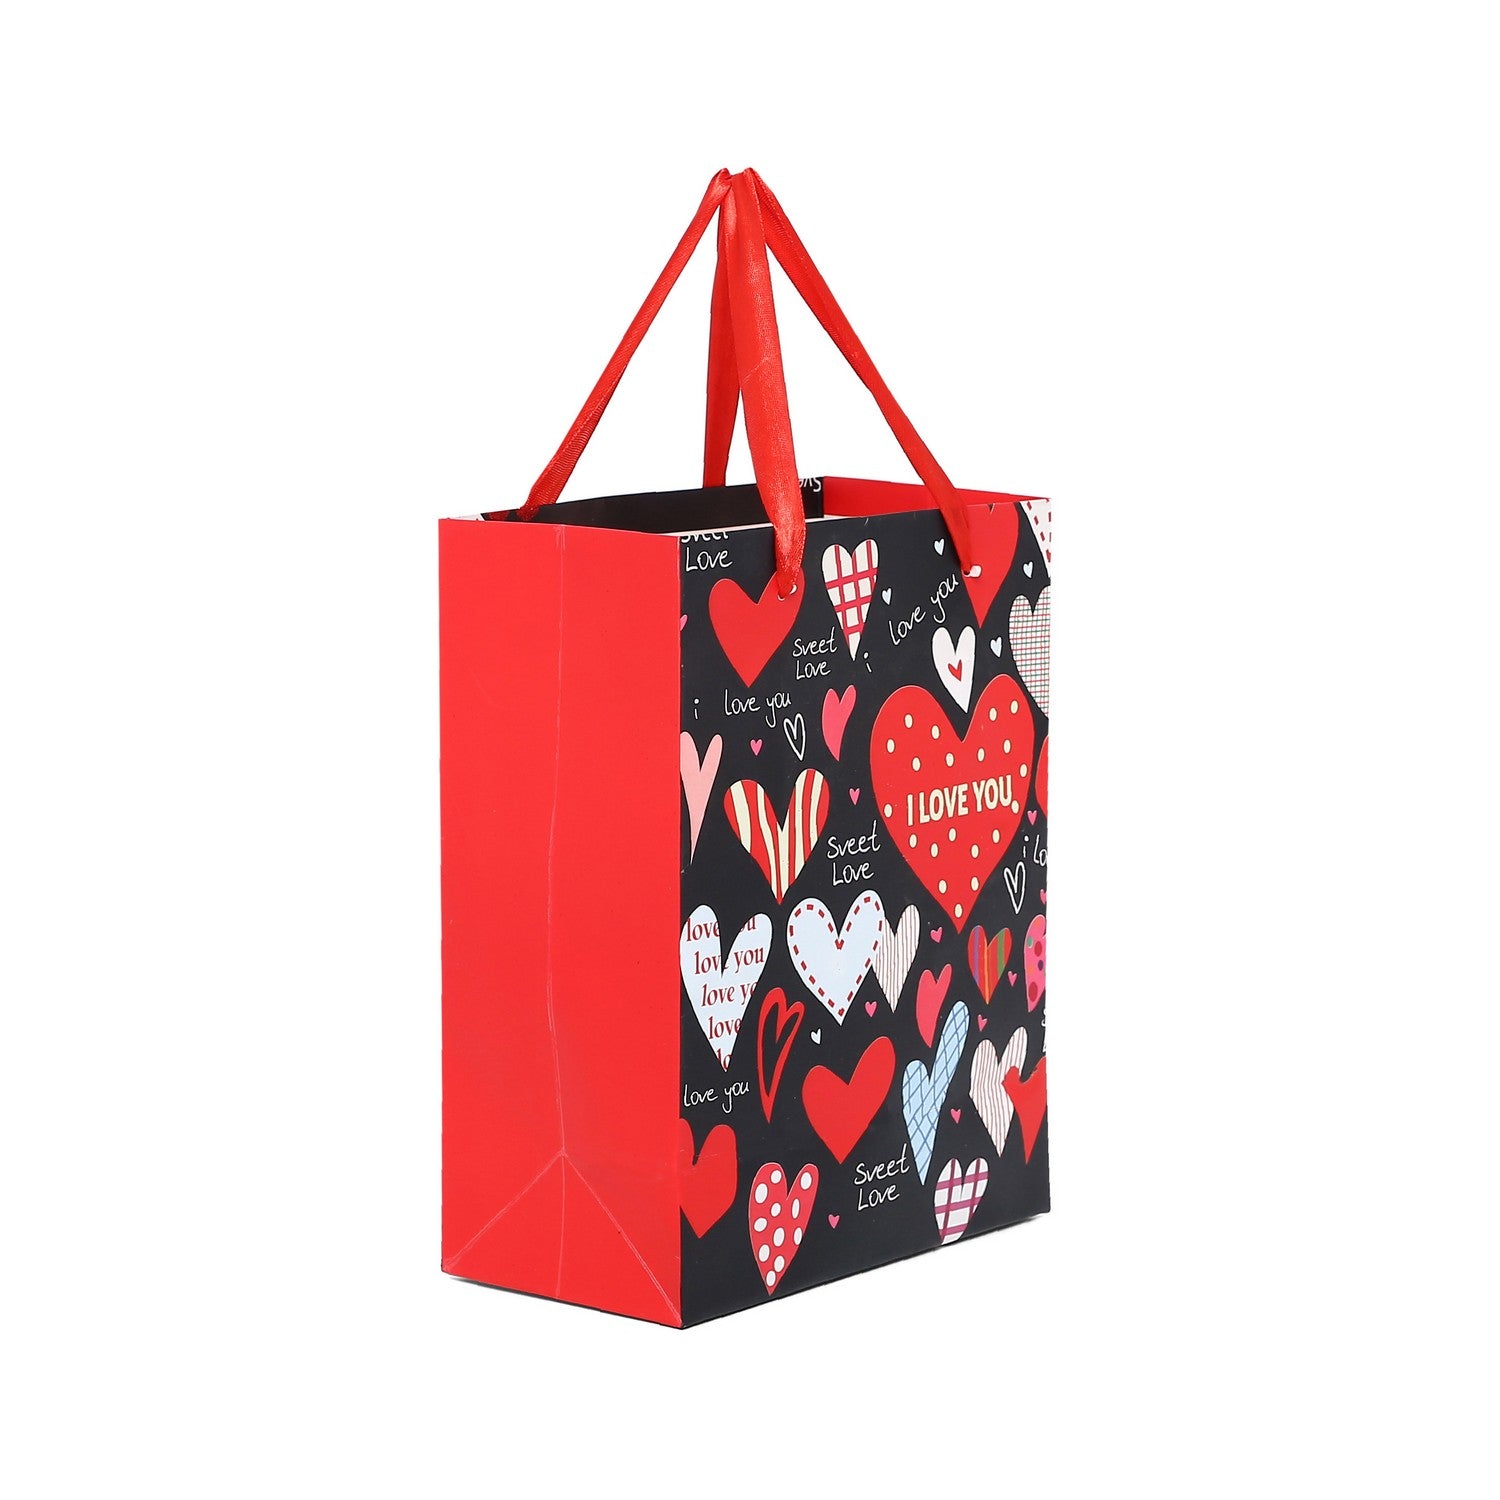 SHUBAN Valentine's Day hearts shape Paper Bag for Gifting, Valentine's Presents, birthday gifts (23 X 18 X 9 CM ) - Set of 5 | Book Bargain Buy